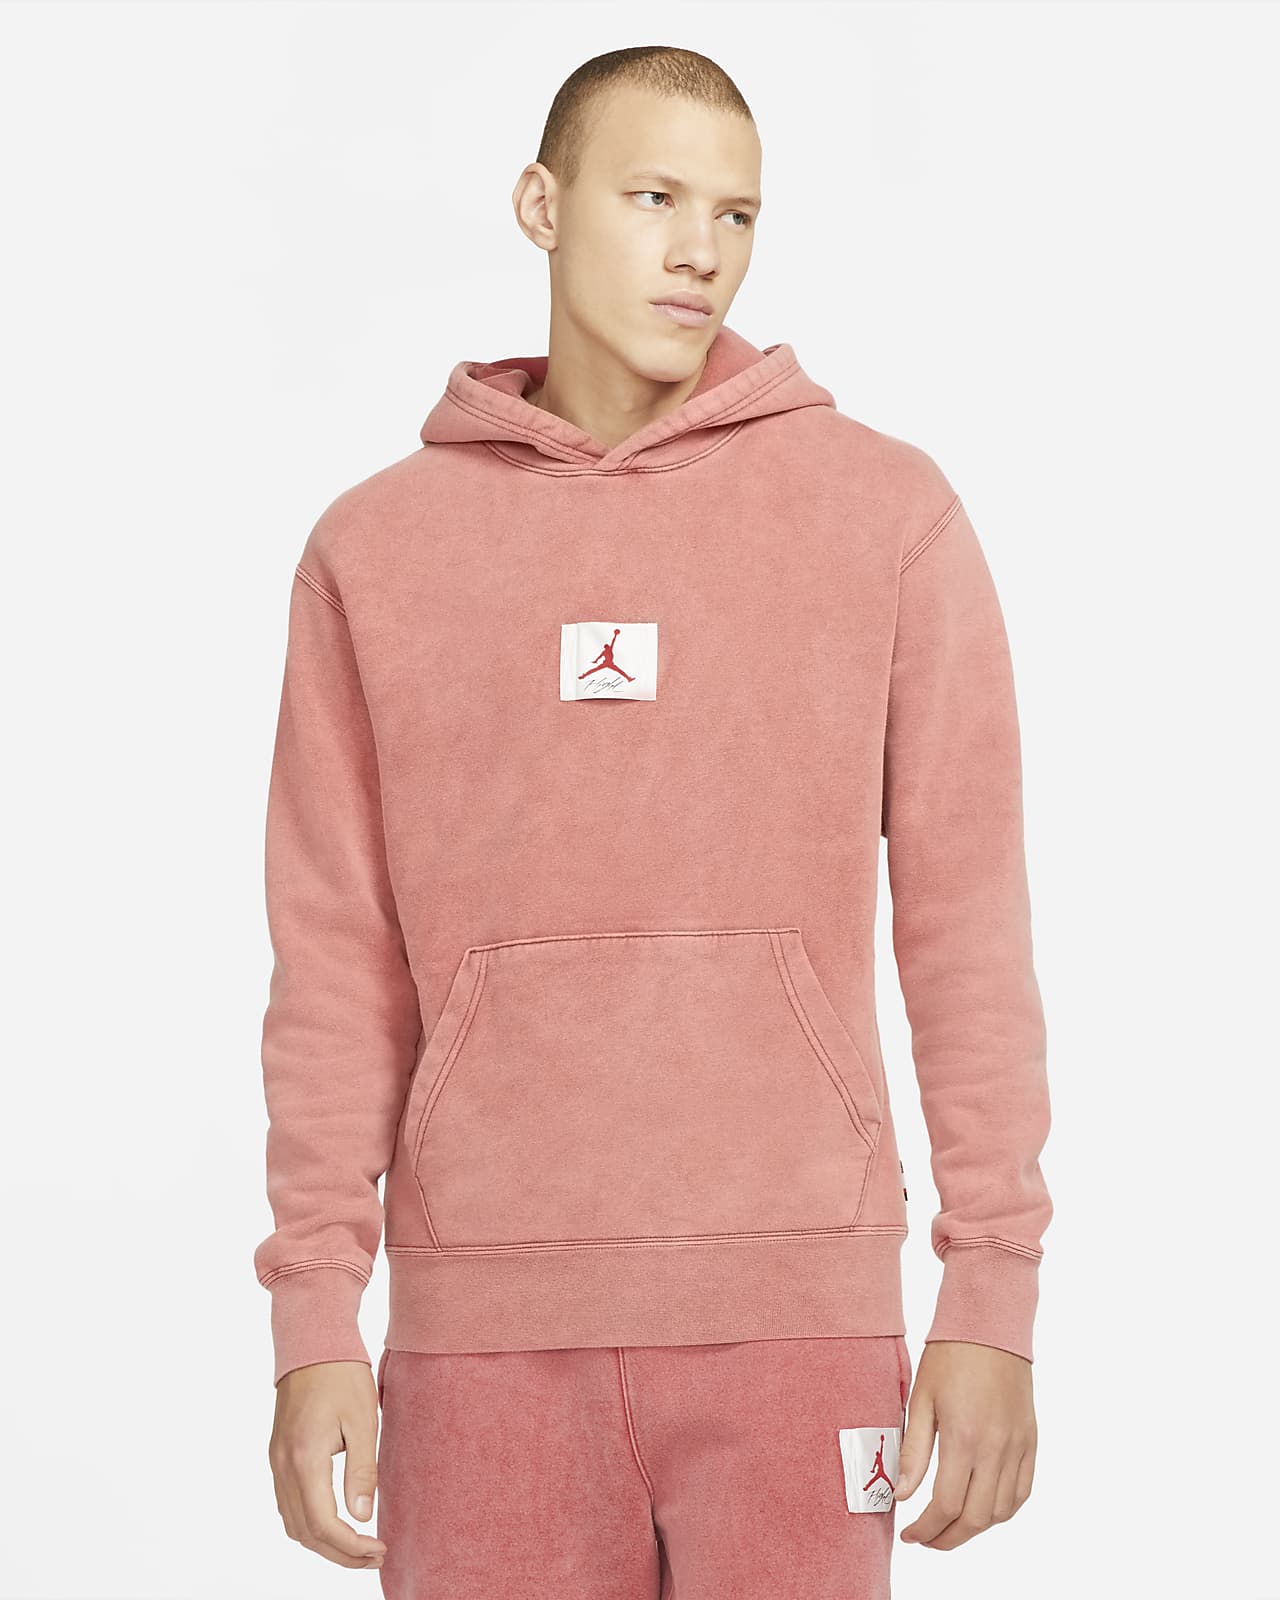 Graphic Pullover Hoodie. Nike NL